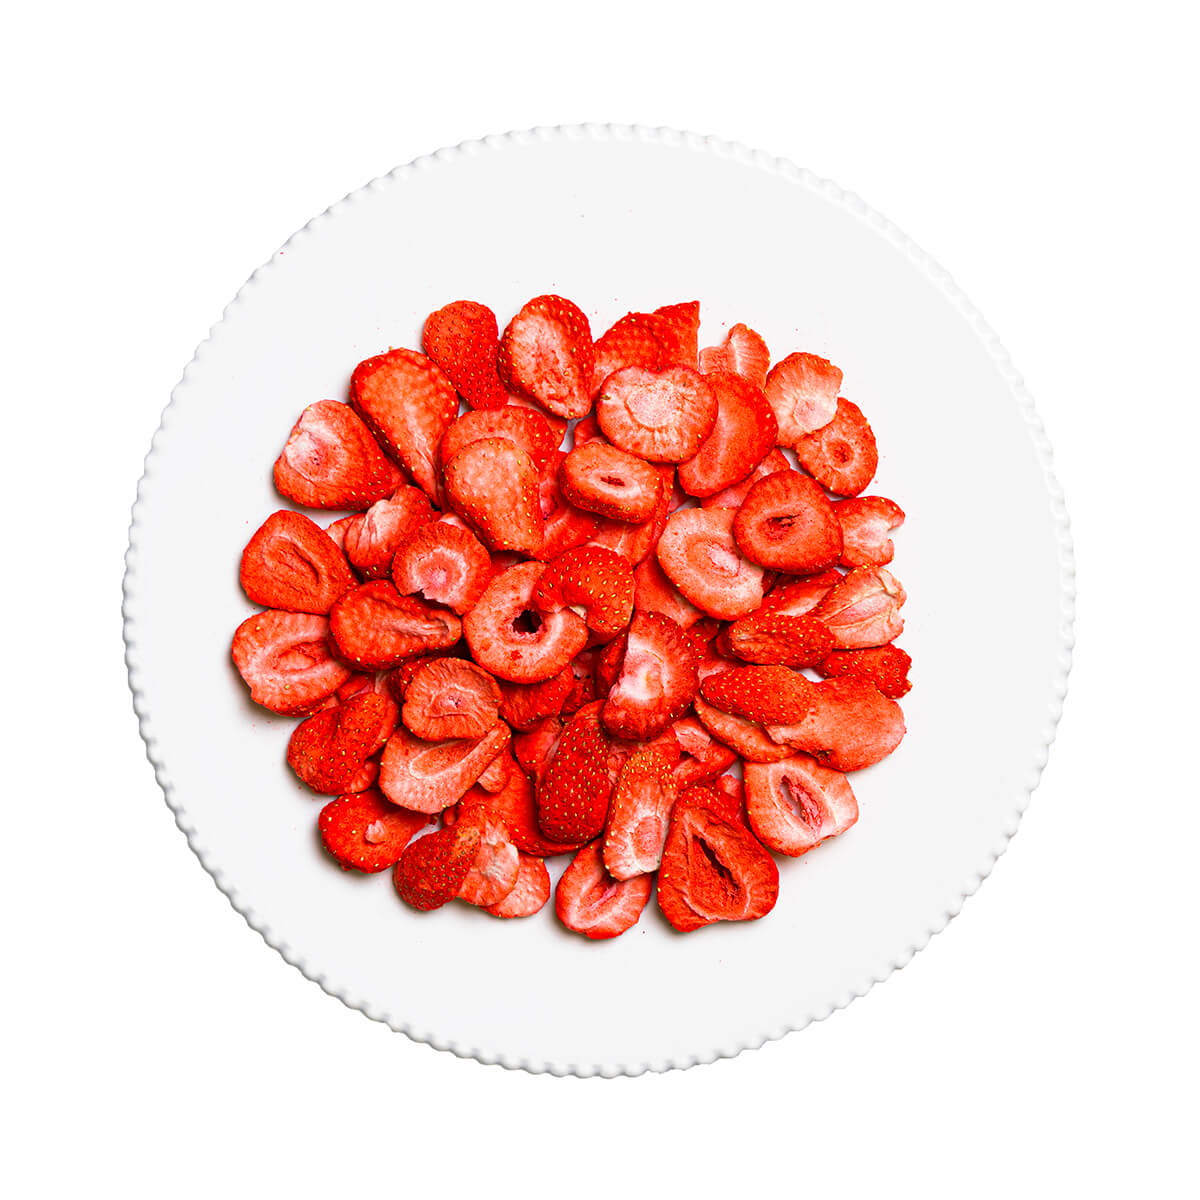 Freeze-Dried Strawberries Sliced For Baking or Snacks